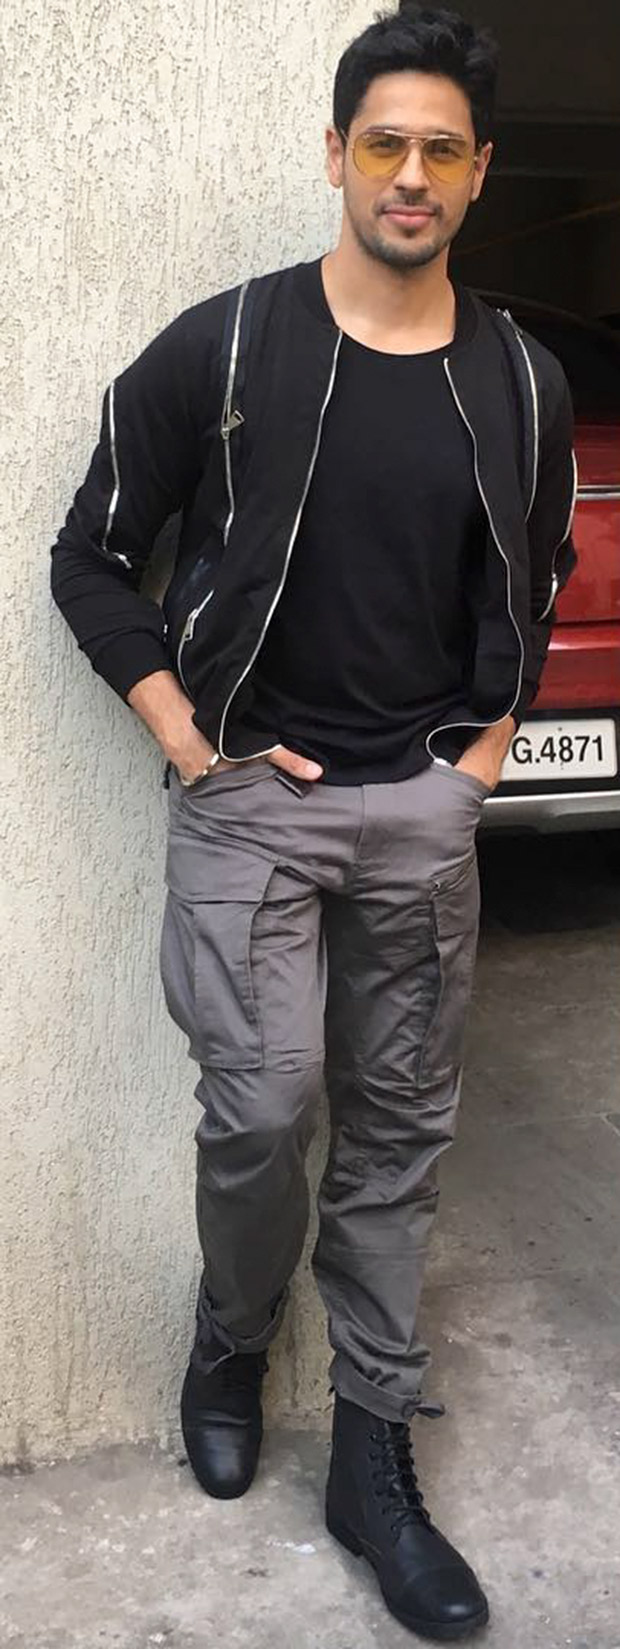 Sidharth Malhotra works the military style for Aiyaary promotions 